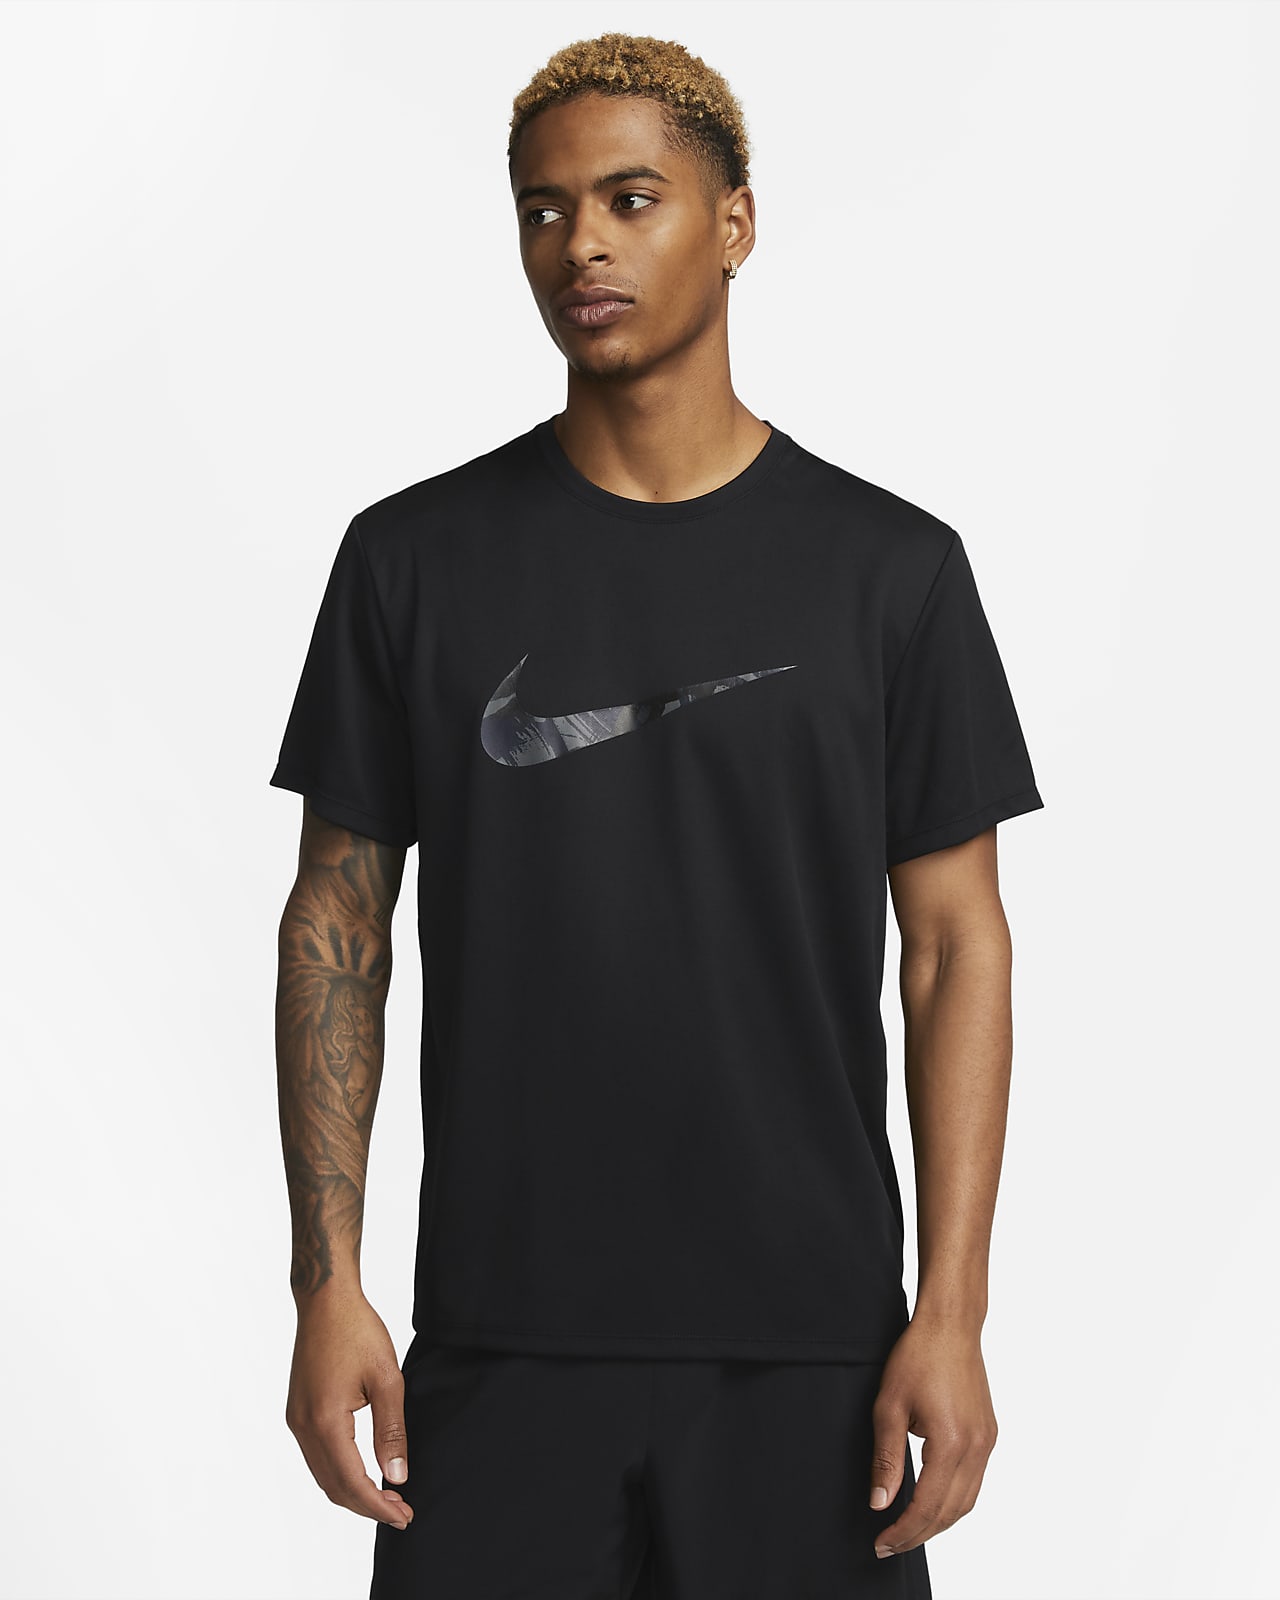 https://static.nike.com/a/images/t_PDP_1280_v1/f_auto,q_auto:eco/de8d40ab-4f64-4354-adbd-2bb384a57f77/miler-dri-fit-uv-short-sleeve-running-top-zGssD2.png